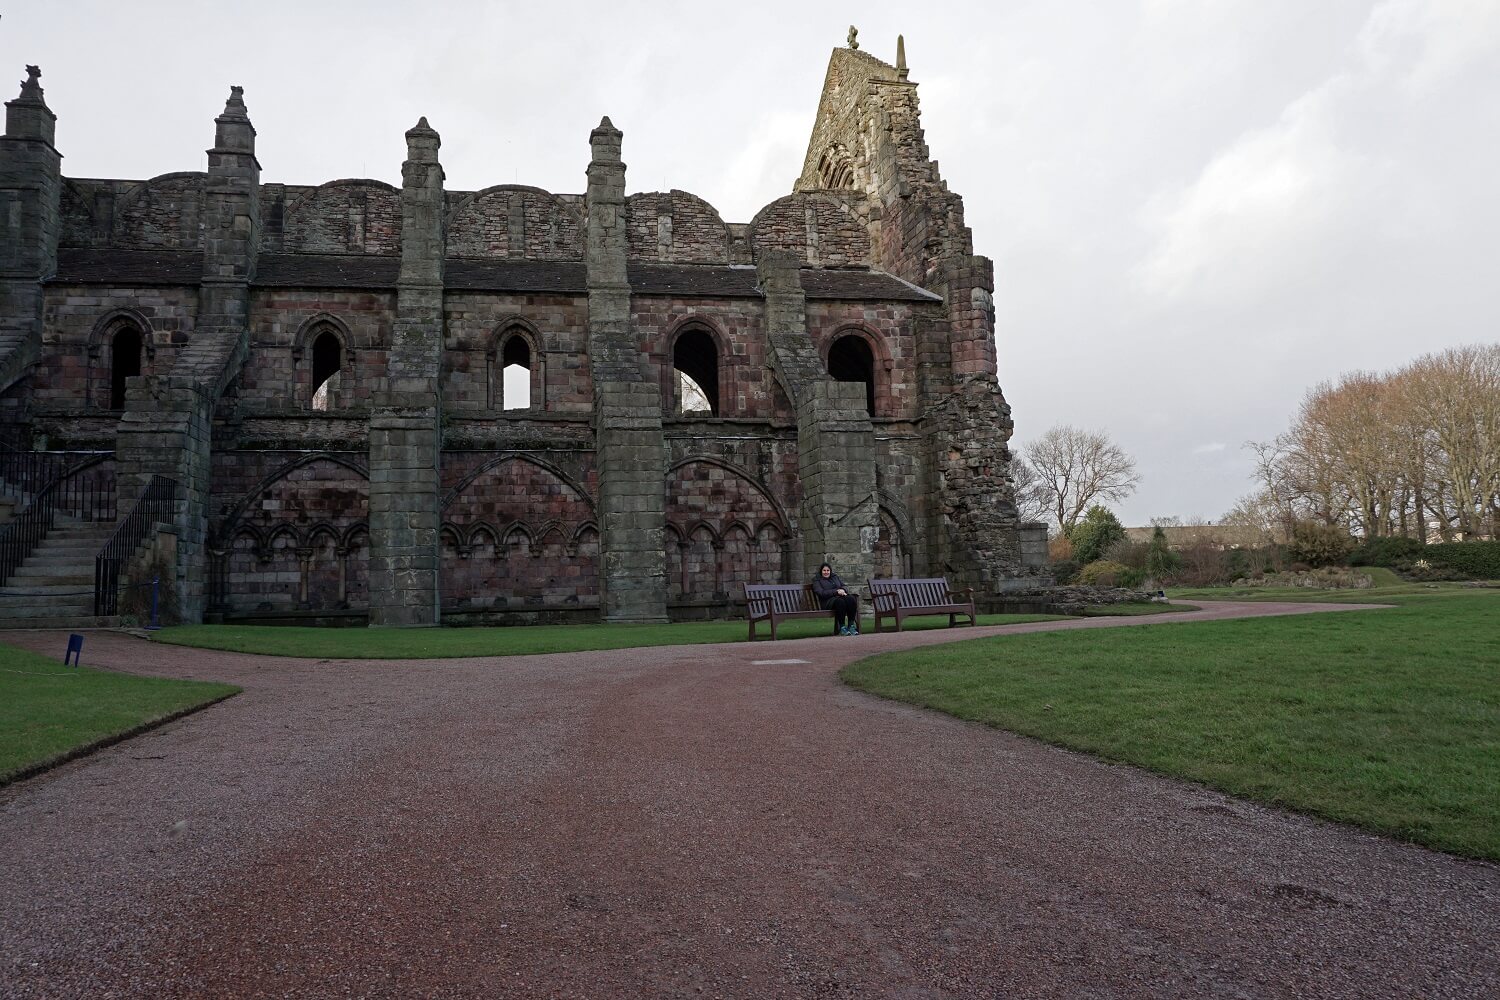 Anisa relaxing outside the Holyrood Abbey. - 